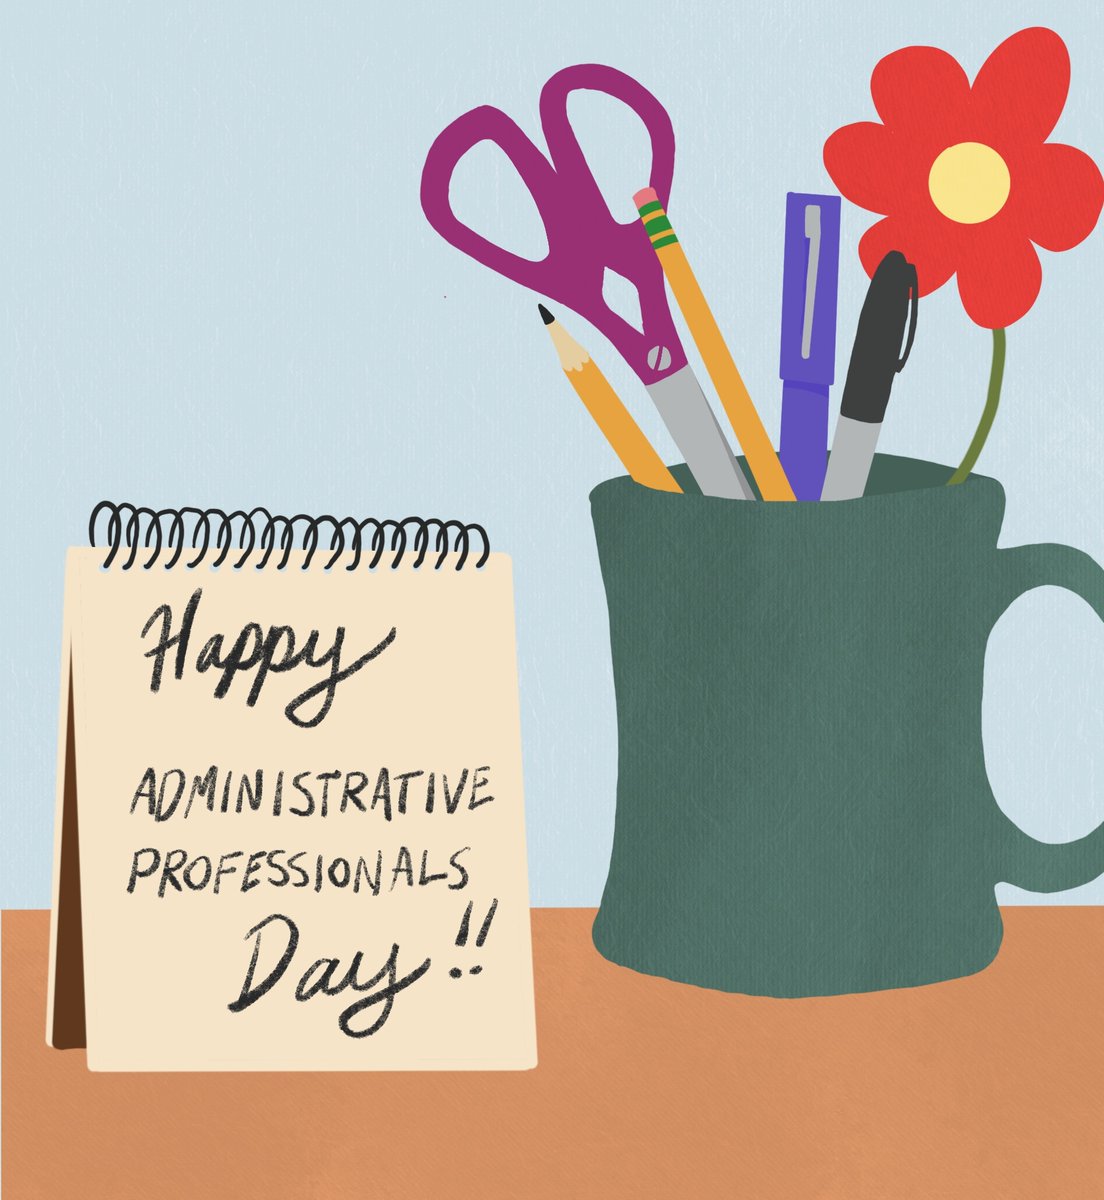 Happy Administrative Professionals Day to all our hardworking administrative staff at UCSF OHNS! You are valued and appreciated. ♥